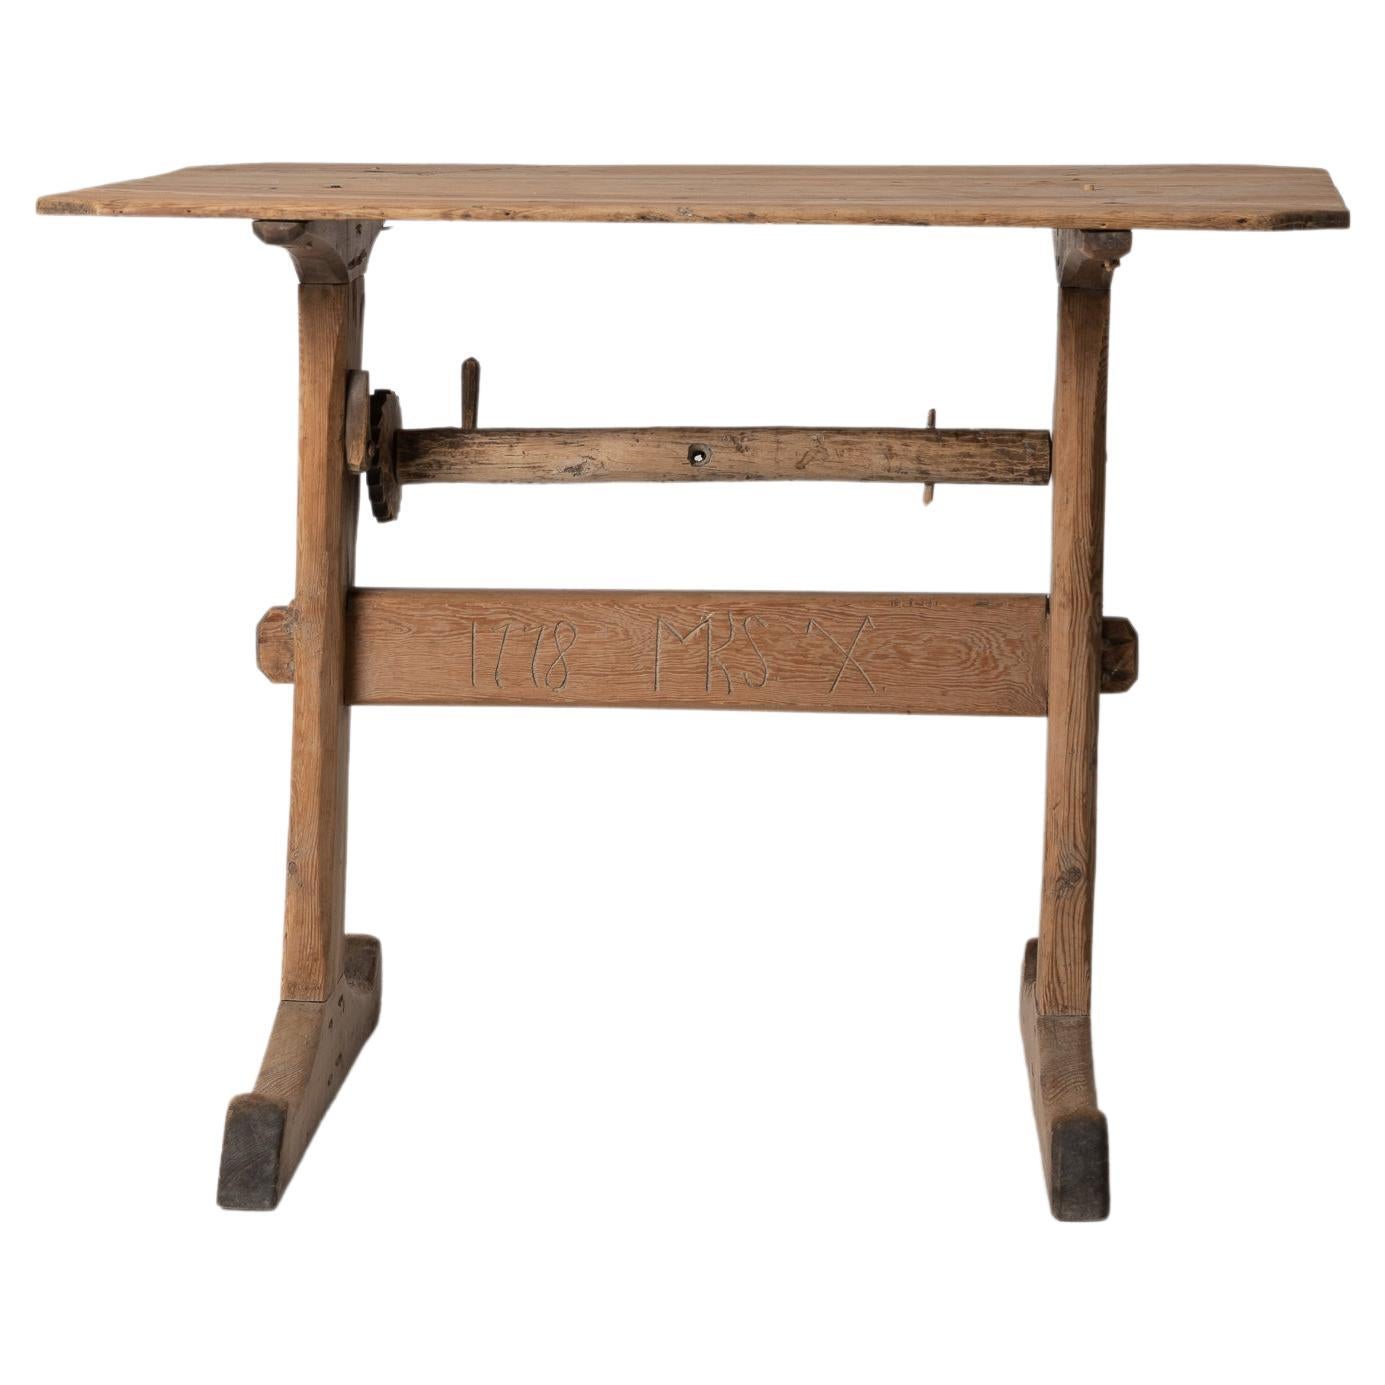 Small Swedish folk art table from northern Sweden with a hand carved year 1778, initials and house mark. The table is a charming folk art furniture with a simple construction and patina of time. It’s unusual to see dating and markings on these kinds